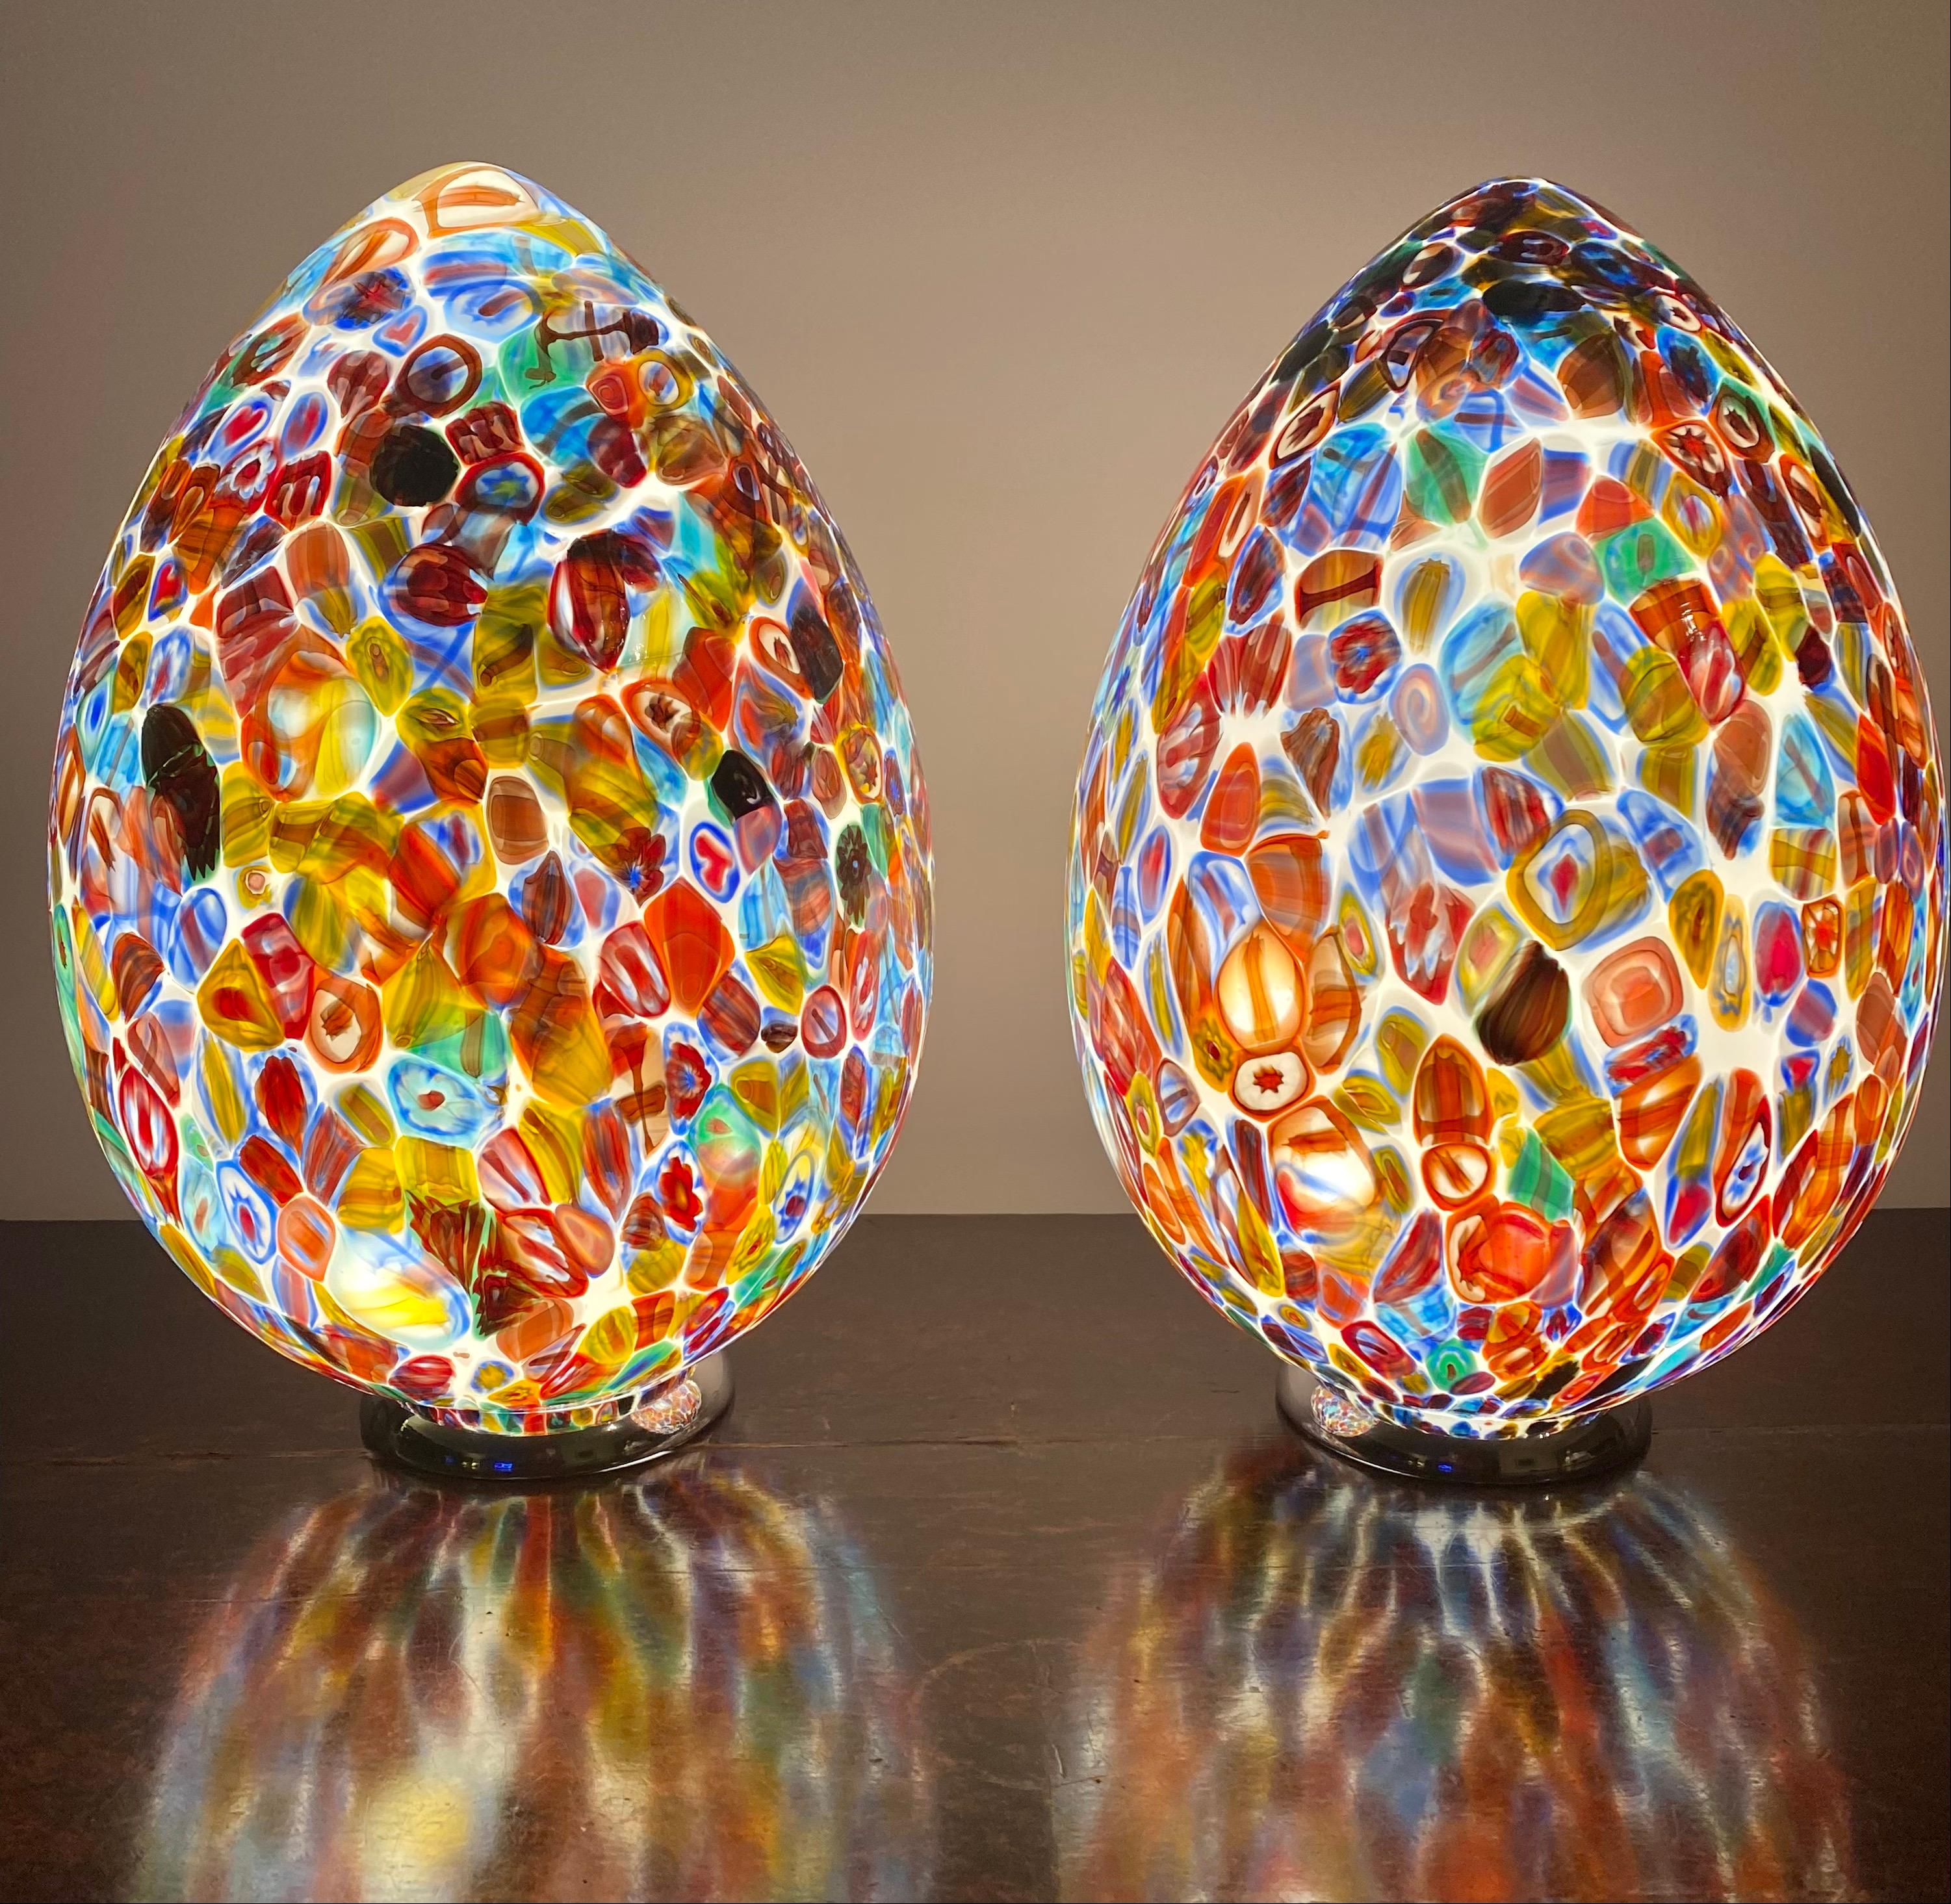 Italian Murano Millefiori Murrine Pair of Egg Shape Lamps, Circa 1985

A pair of very decorative and high quality Murano Millefiori Murrine egg shape lamps are a fantastic example of the kind of work the Murano glass Factories are capable of,